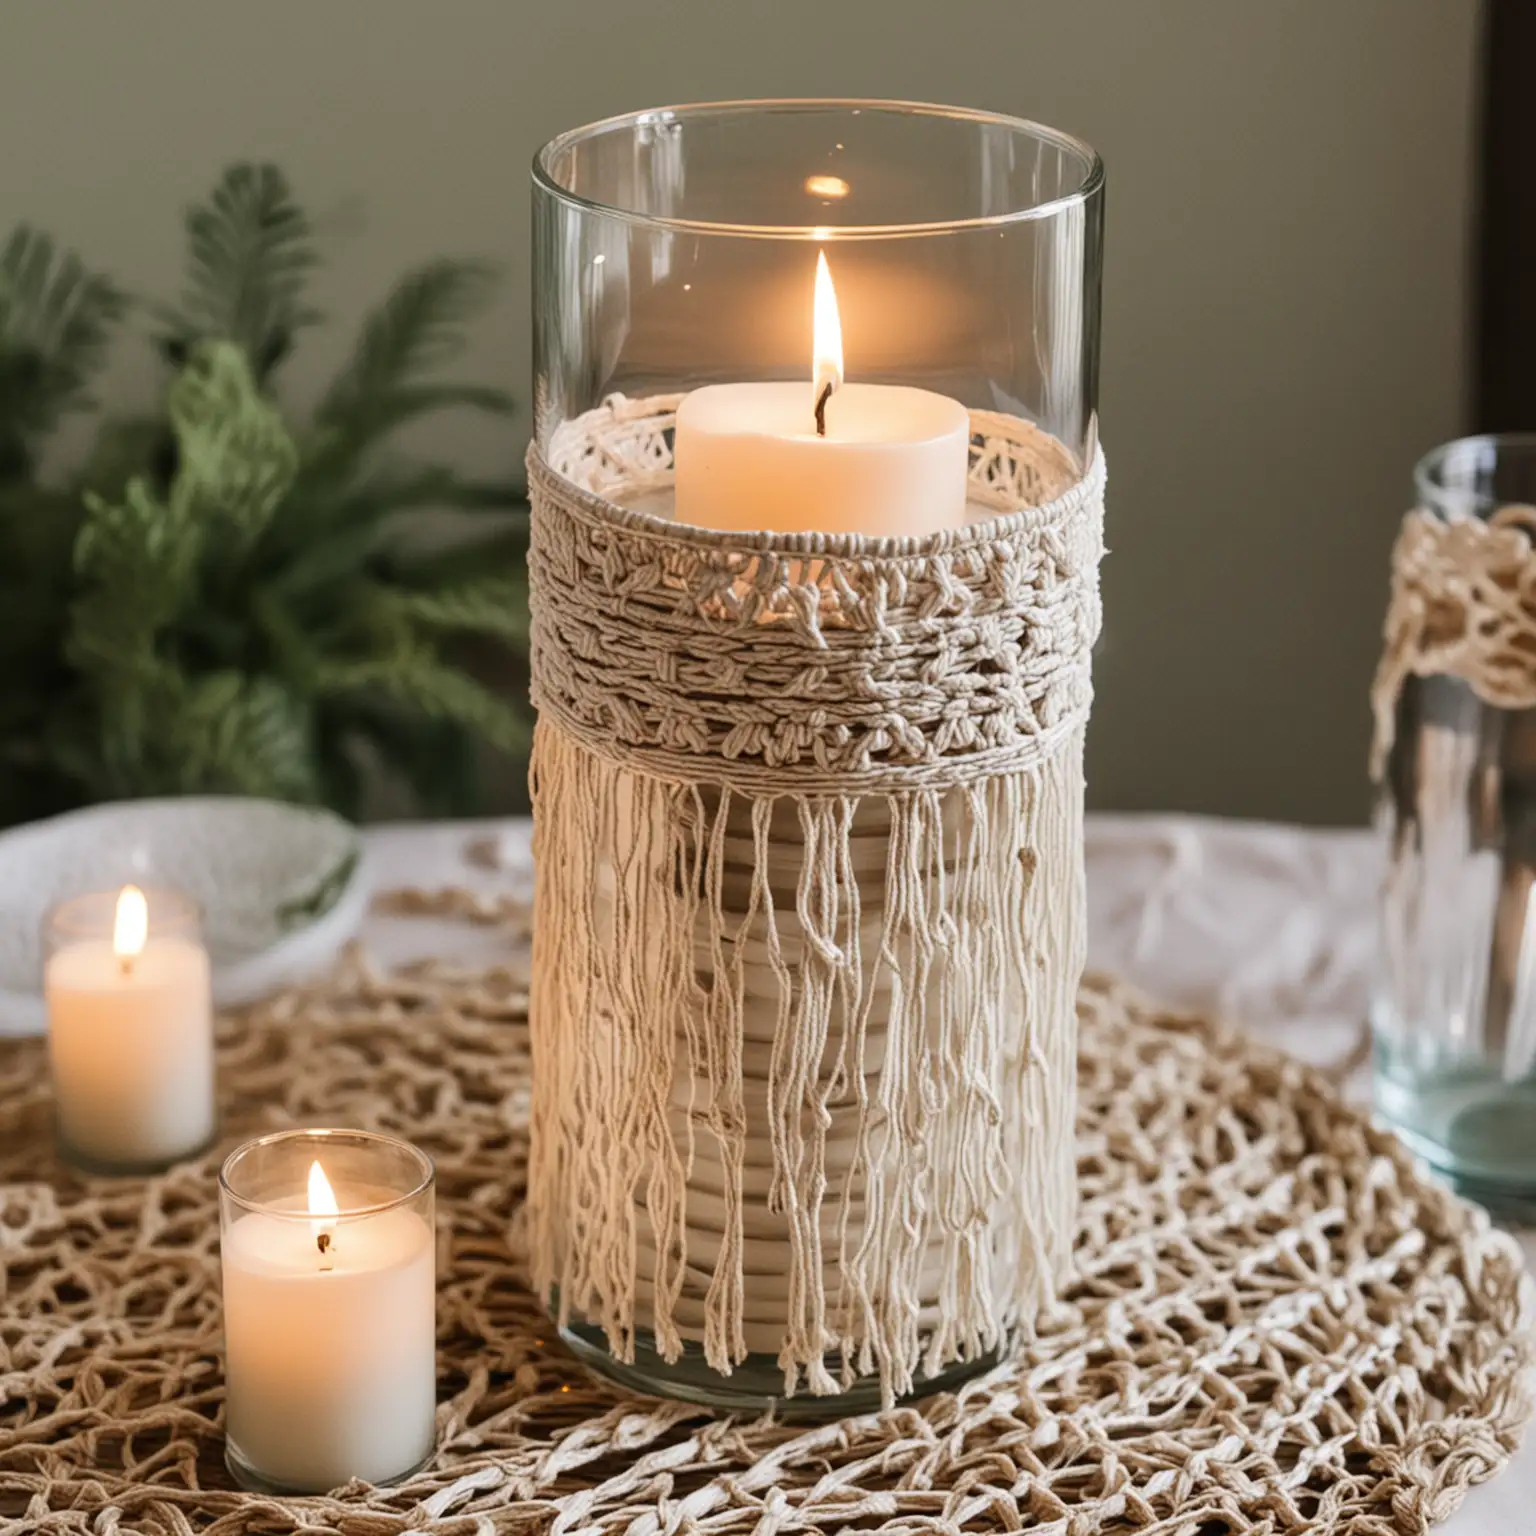 a simple DIY wedding centerpiece using a glass cylinder covered in boho macrame for a boho wedding